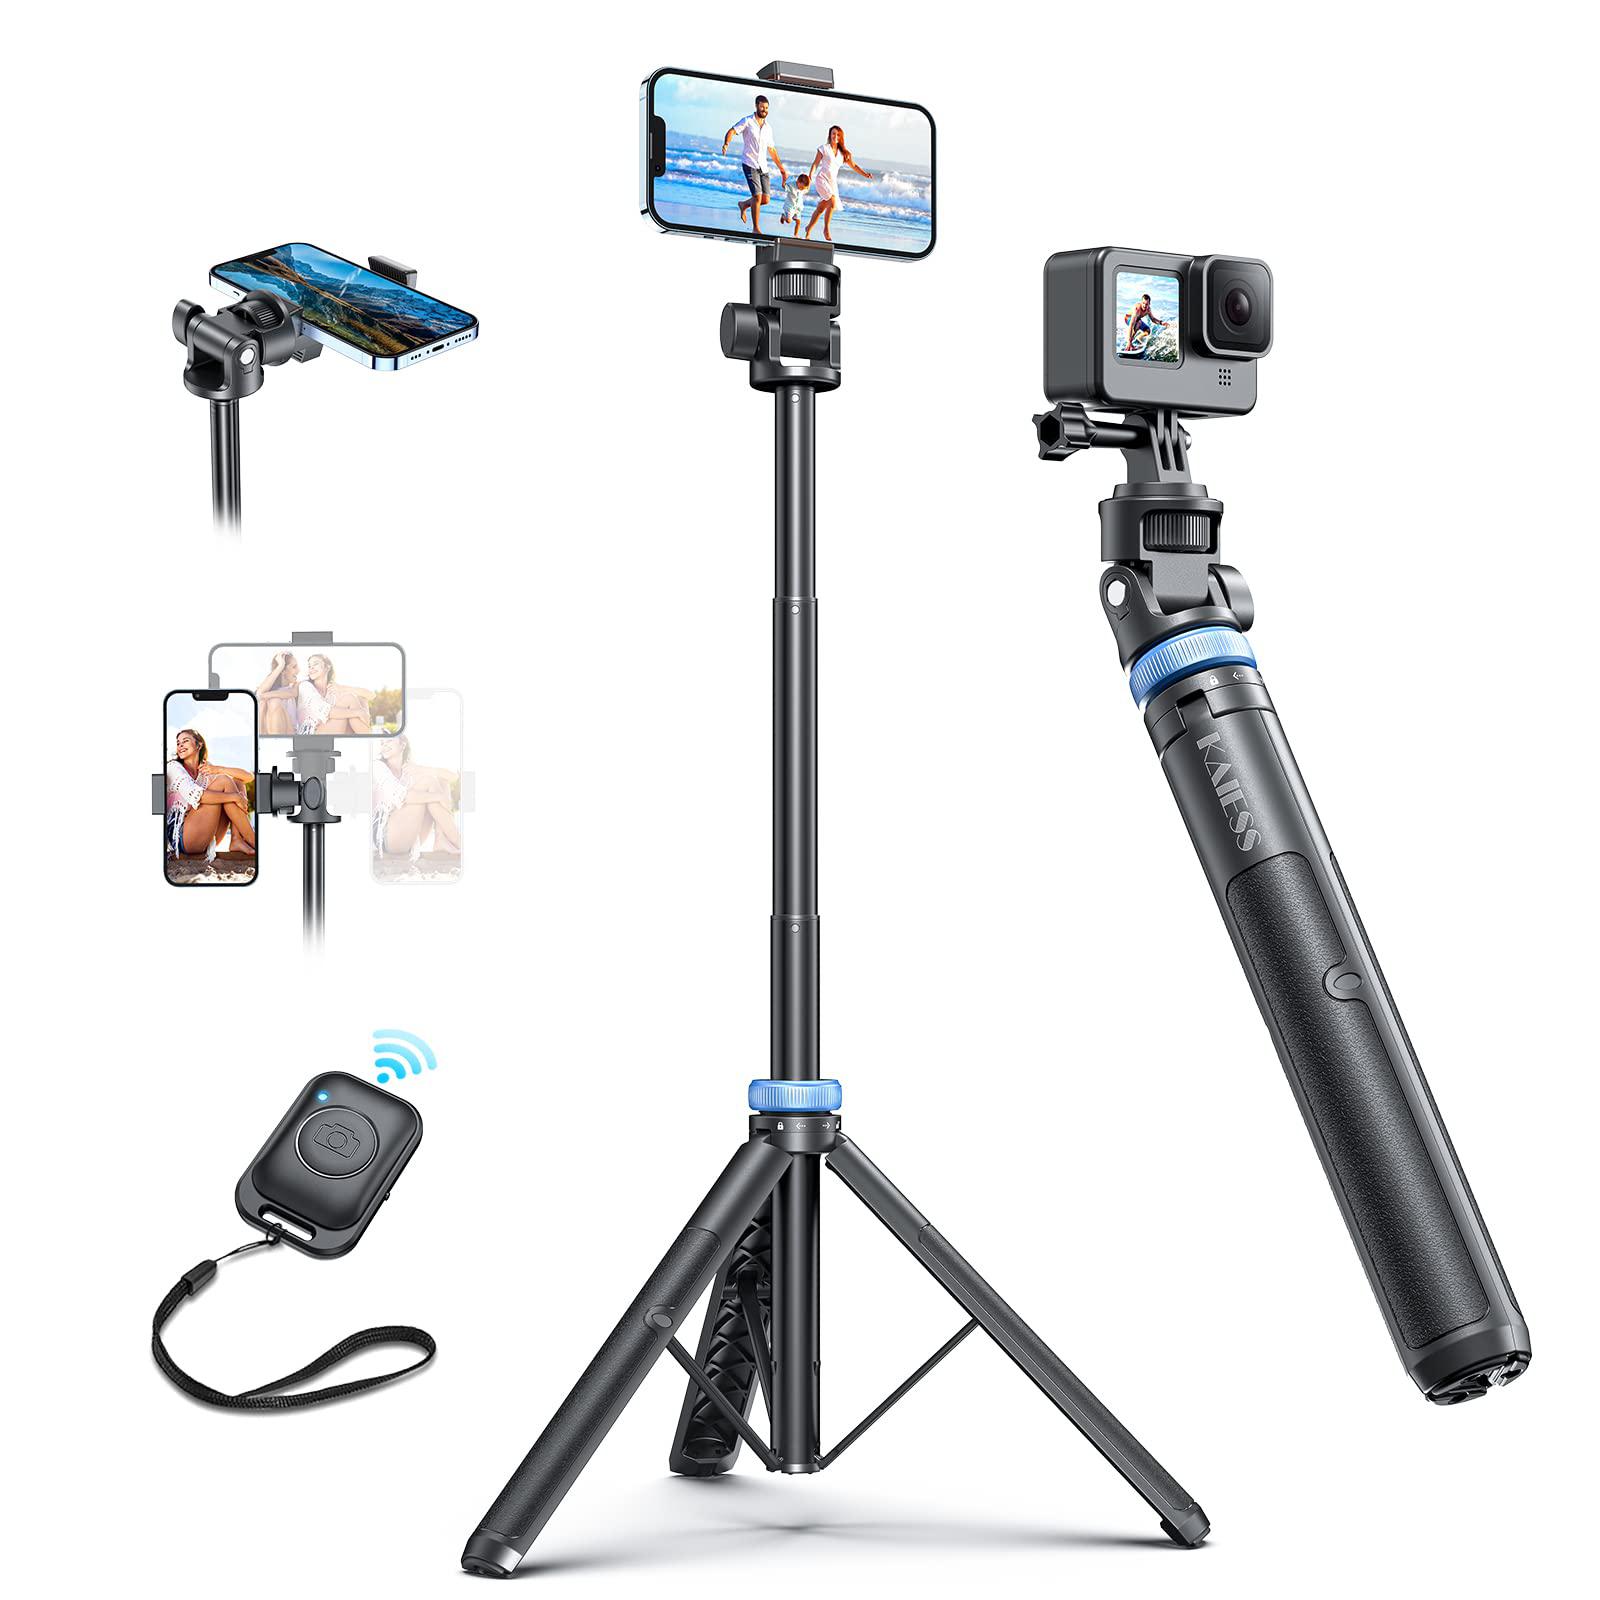 Kaiess [newest] 62" selfie stick tripod with remote - kaiess tripod for iphone, high strength legs & extendable tube tripod stand, f